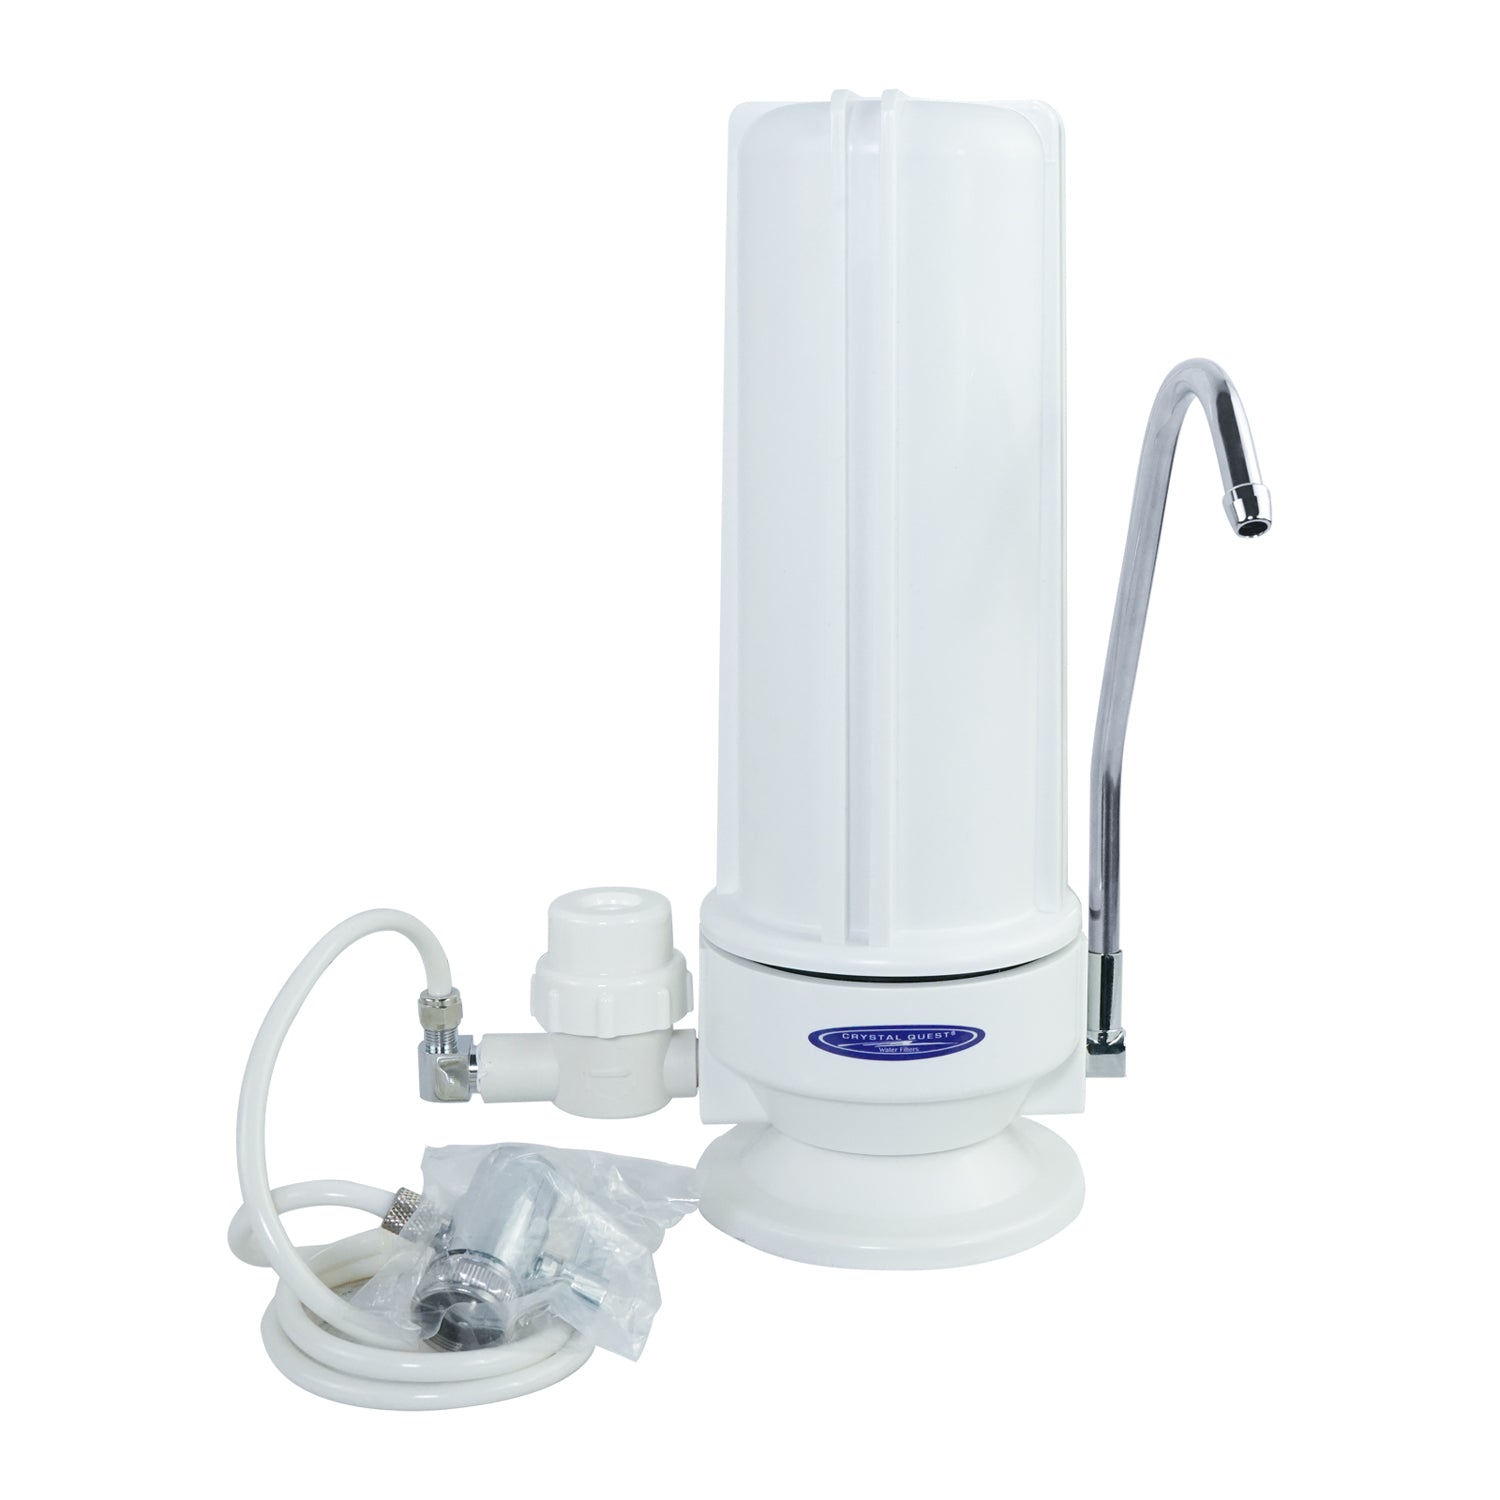 Ceramic Countertop Water Filter System - Countertop Water Filters - Crystal Quest